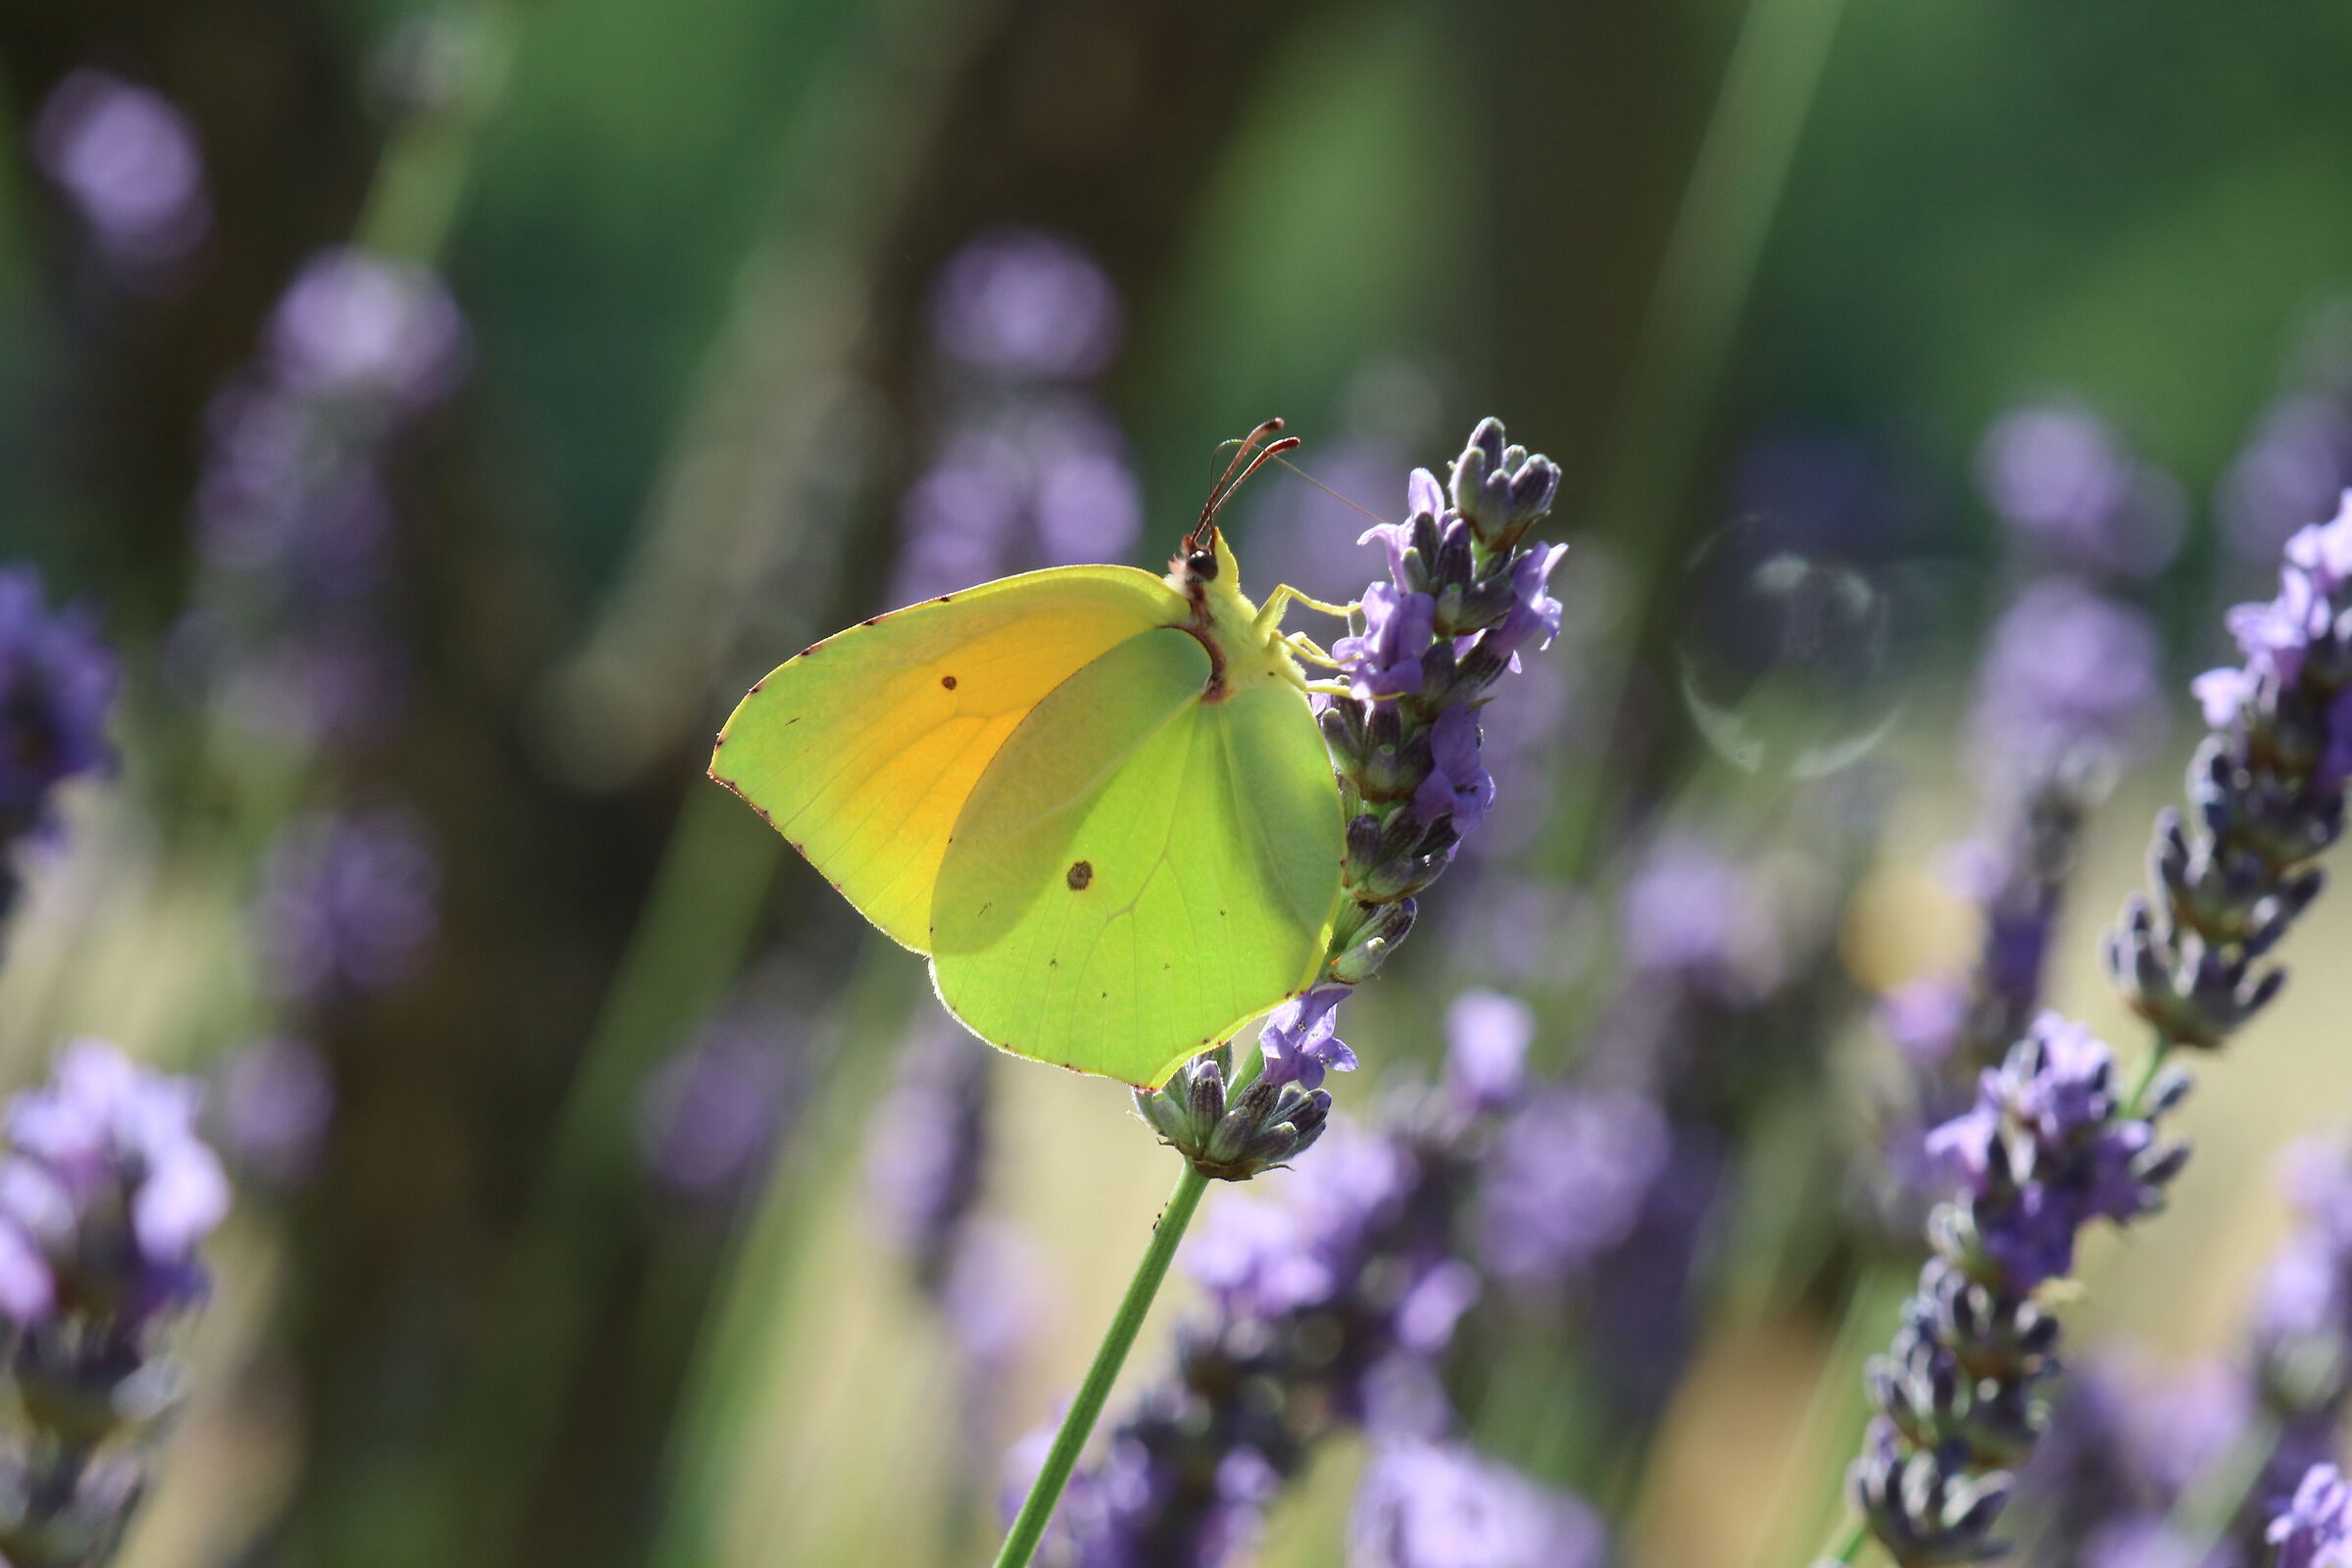 Lavender and the yellow butterfly....